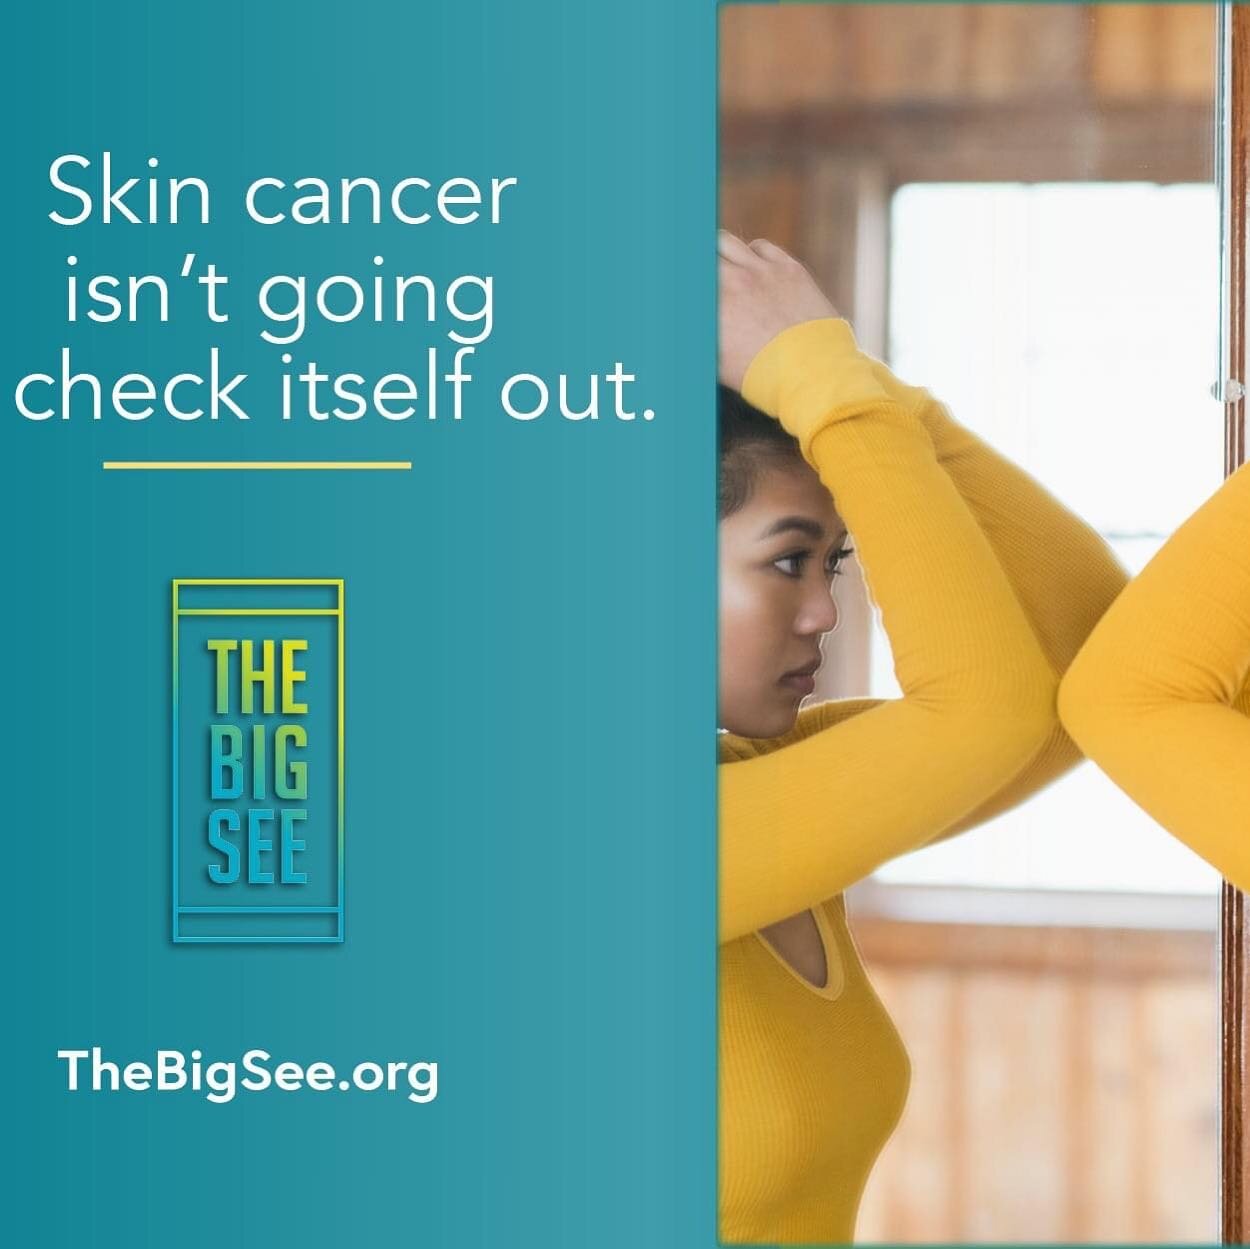 Have you had your skin cancer screening yet?

If not, it's not too late! Call us today!

304-645-3435

226 Skylar Drive
Lewisburg, WV 24901

*Prompt appointments and we accept most insurances!*